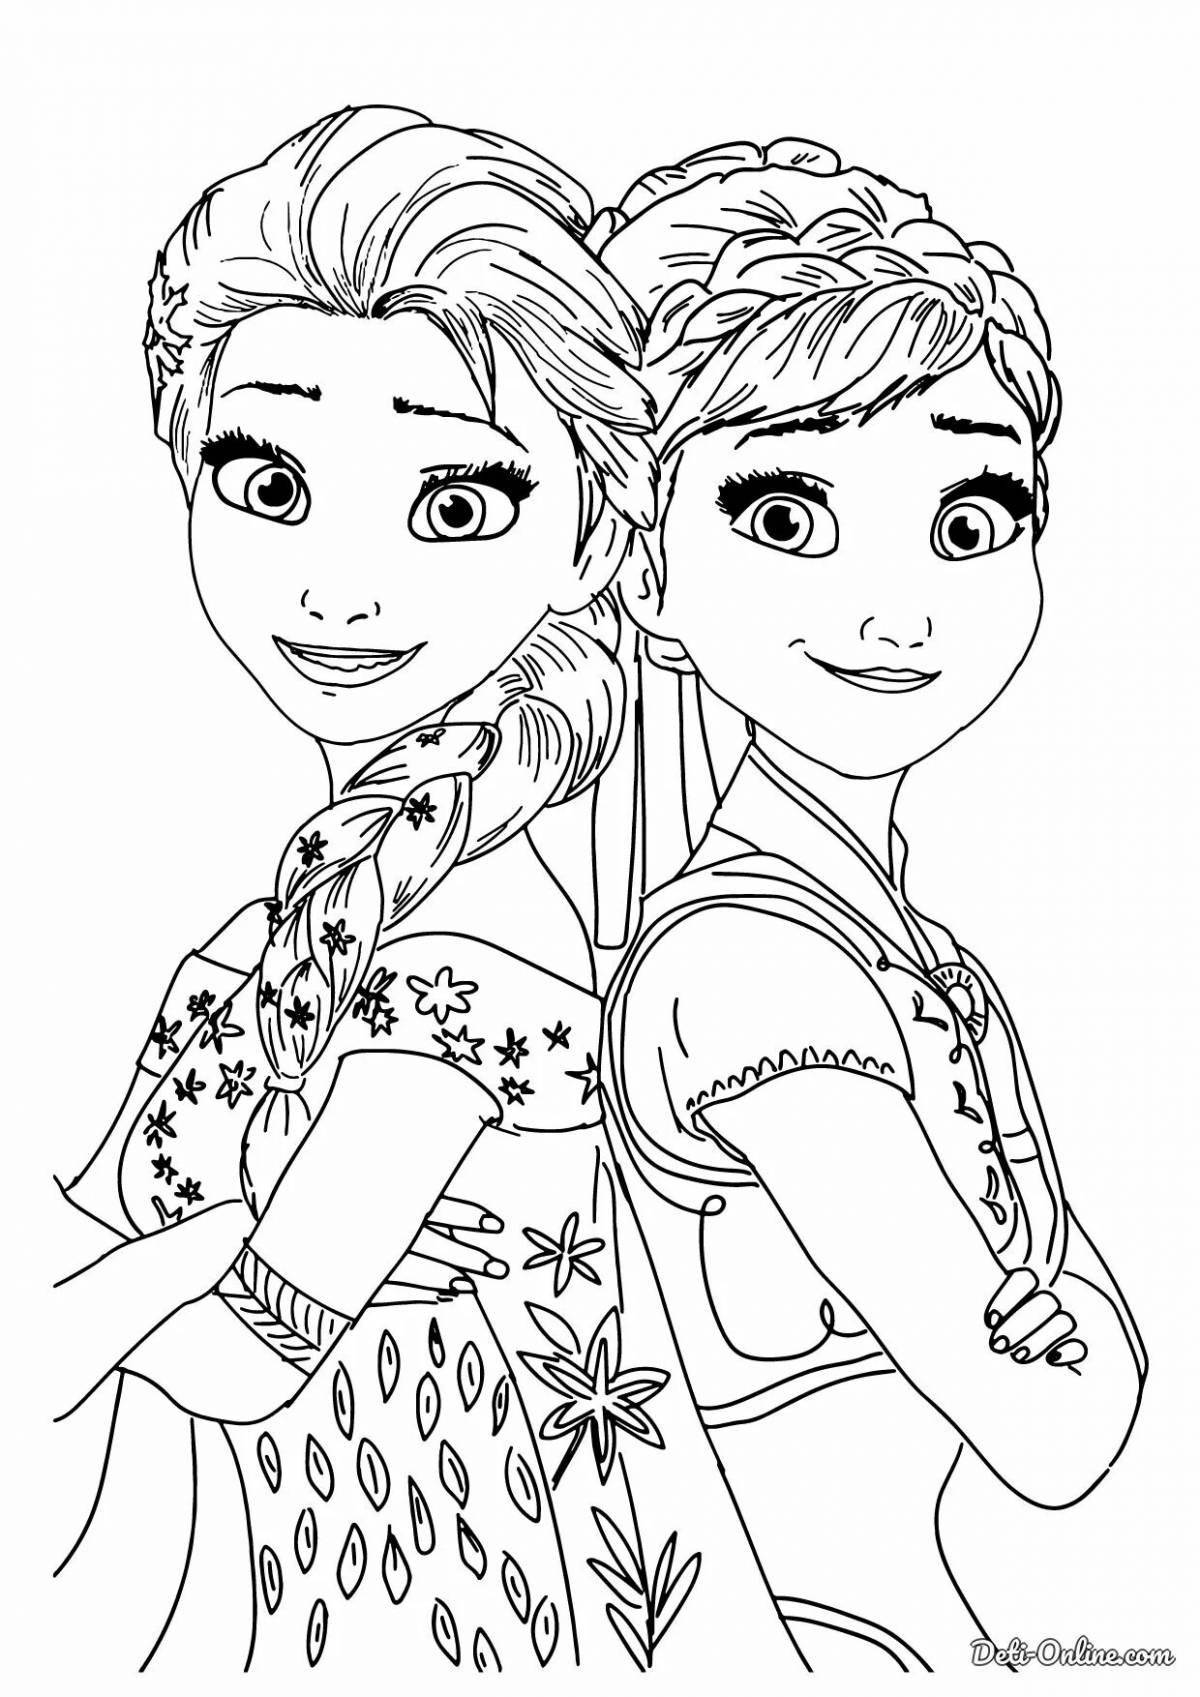 Elsa and anna's charming coloring book